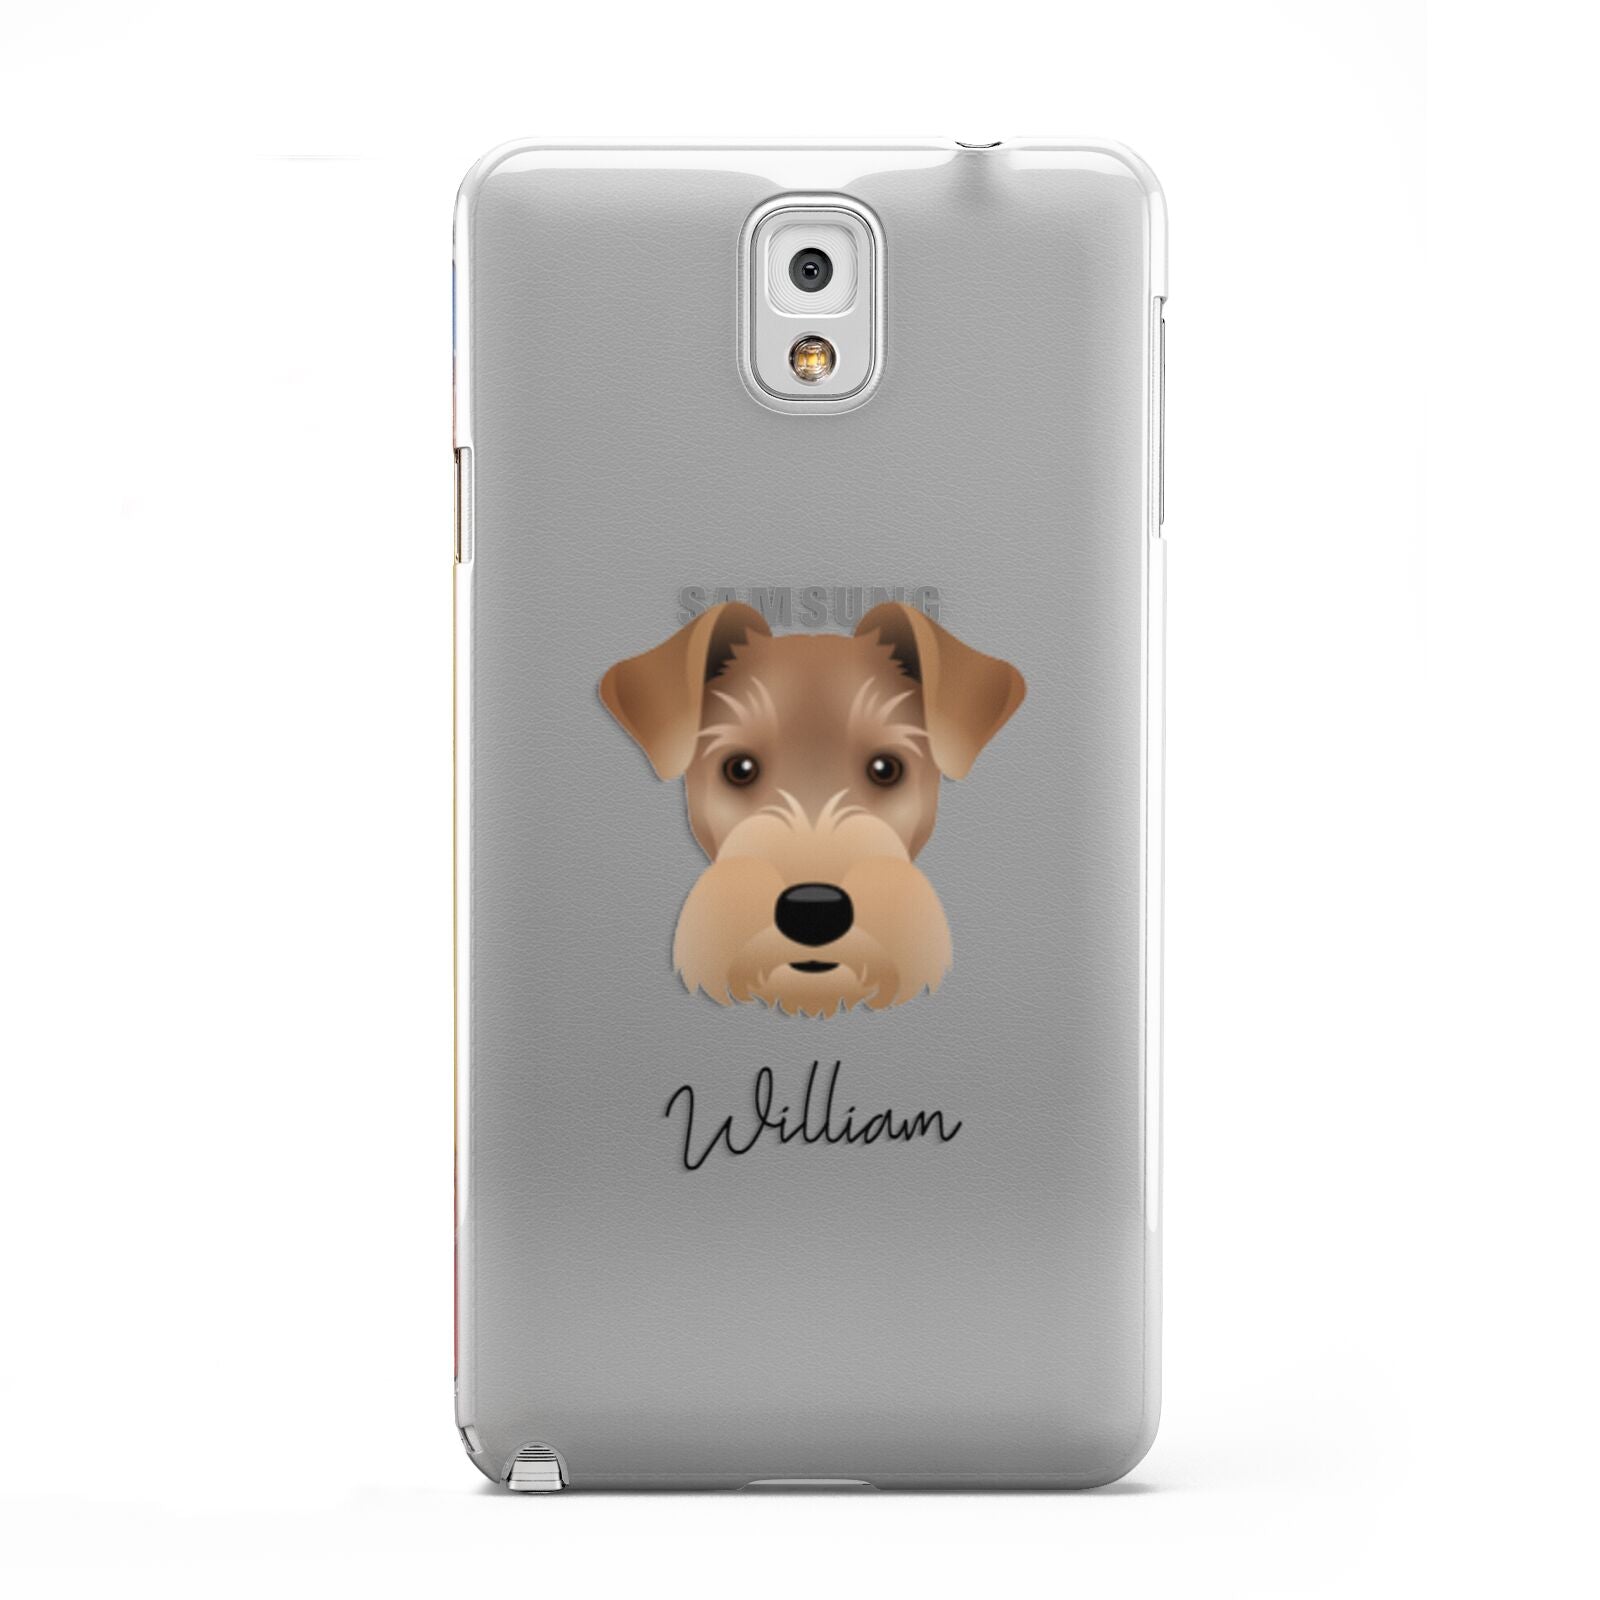 Welsh Terrier Personalised Samsung Galaxy Note 3 Case